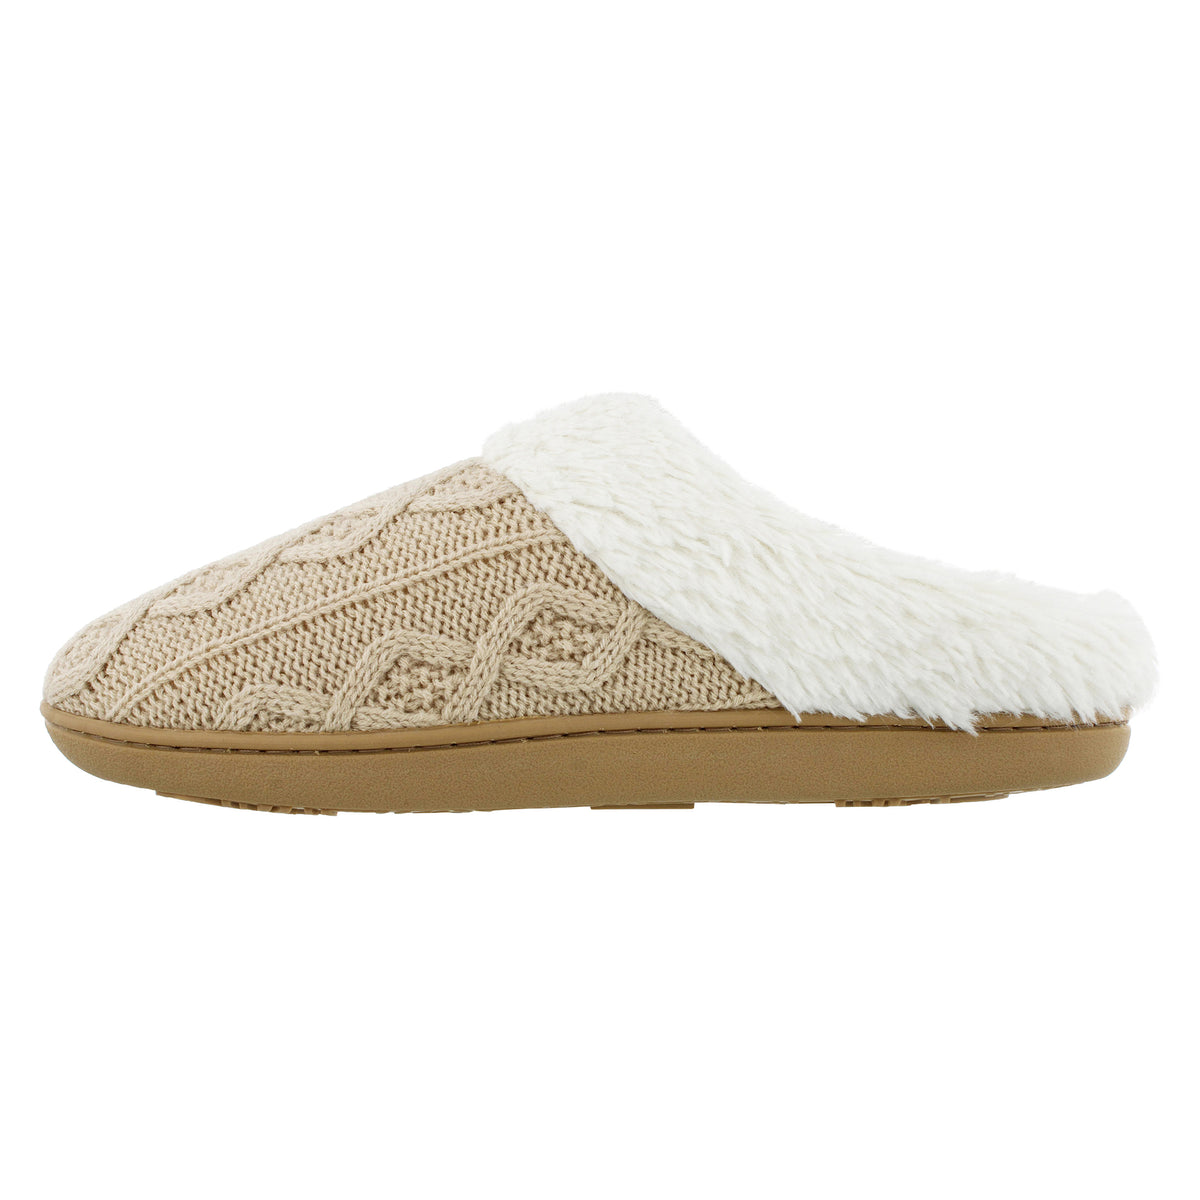 Isotoner Cable Knit Clog Slippers with Sherpa Cuff